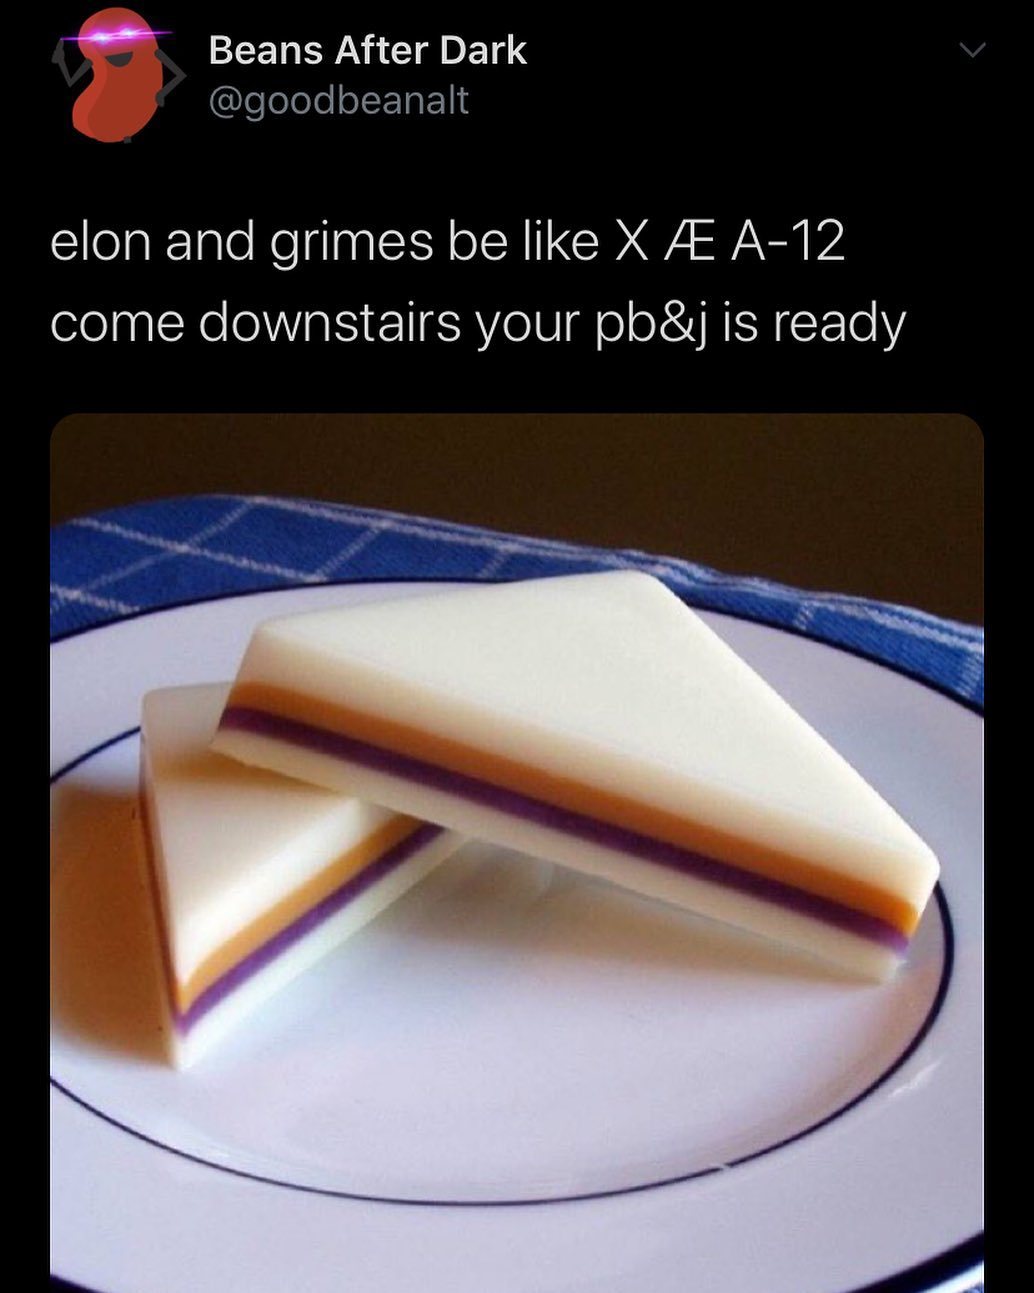 smooth pb&j - Beans After Dark elon and grimes be X A12 come downstairs your pb&j is ready